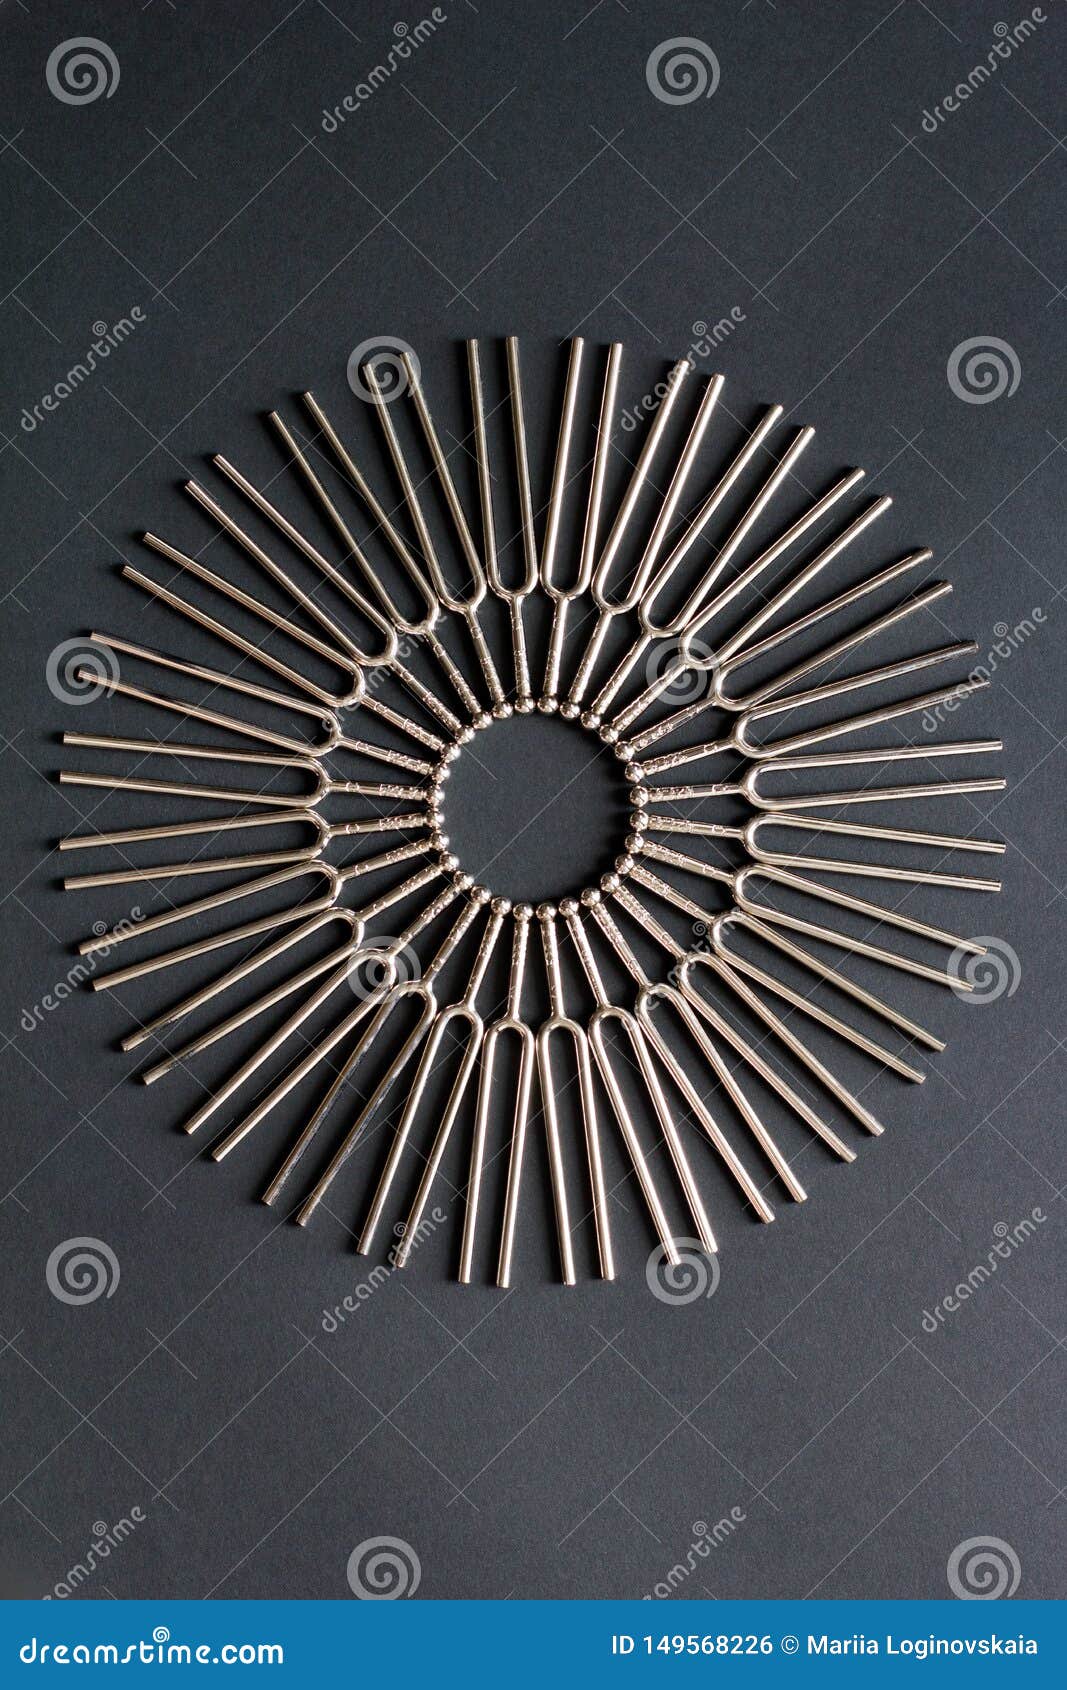 tuning fork round pattern on a black background, centered circular pattern